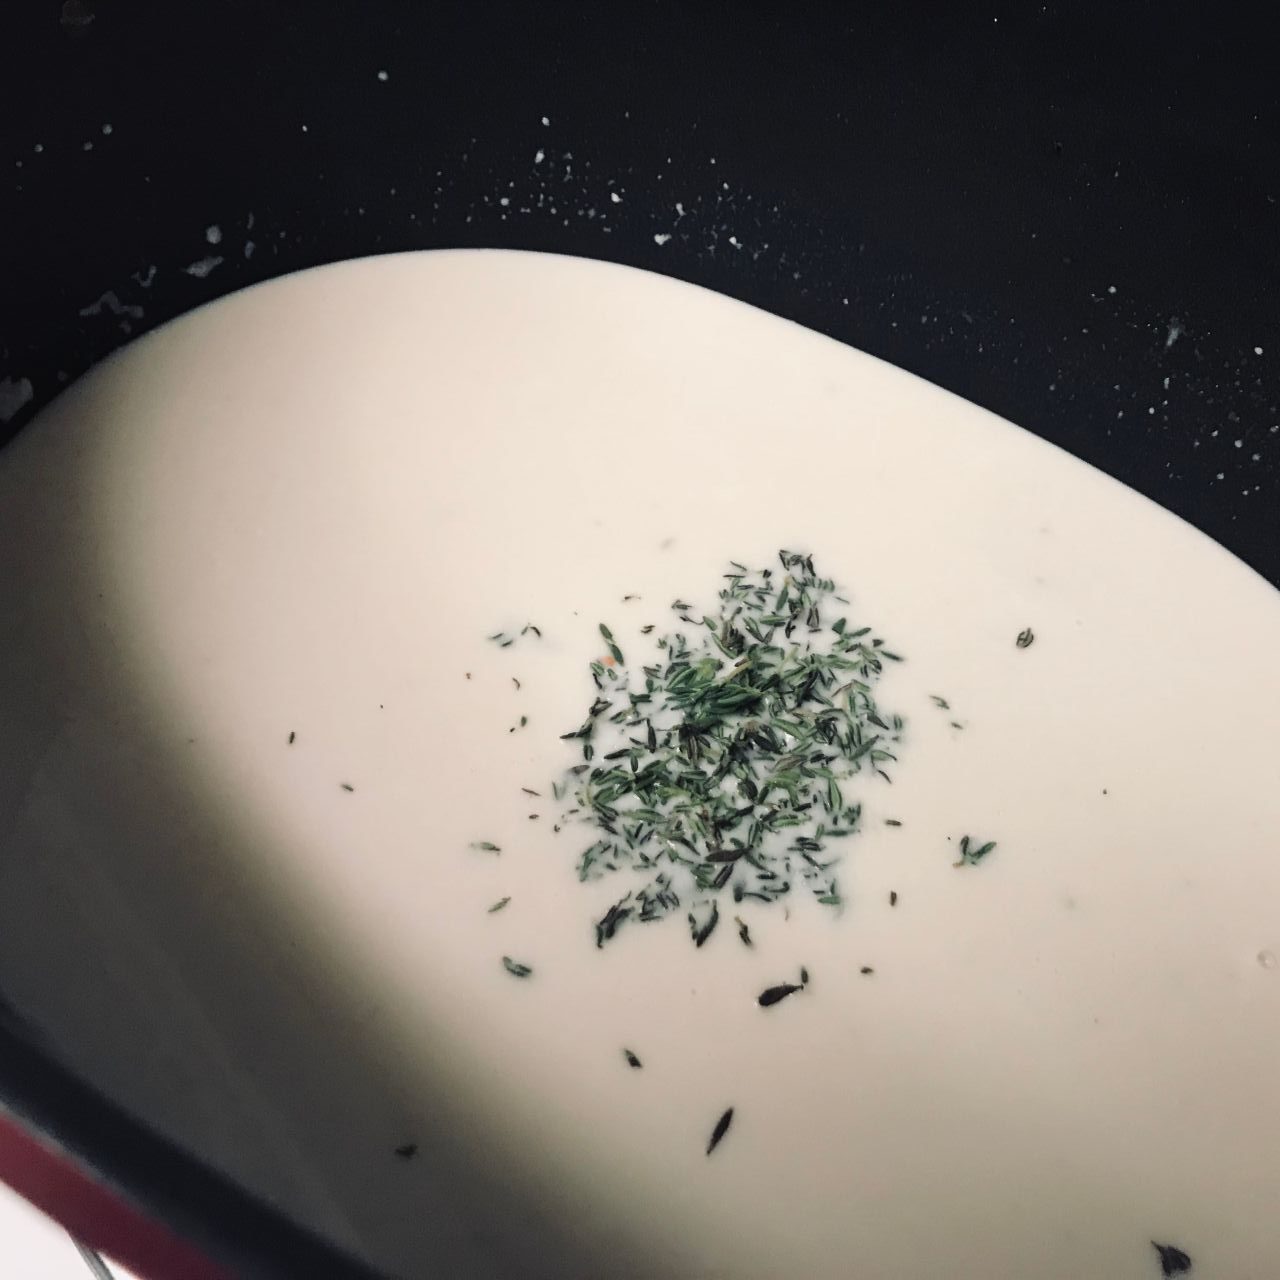 Cream Of Mushroom Soup En Croute With herbs| My Curated Tastes